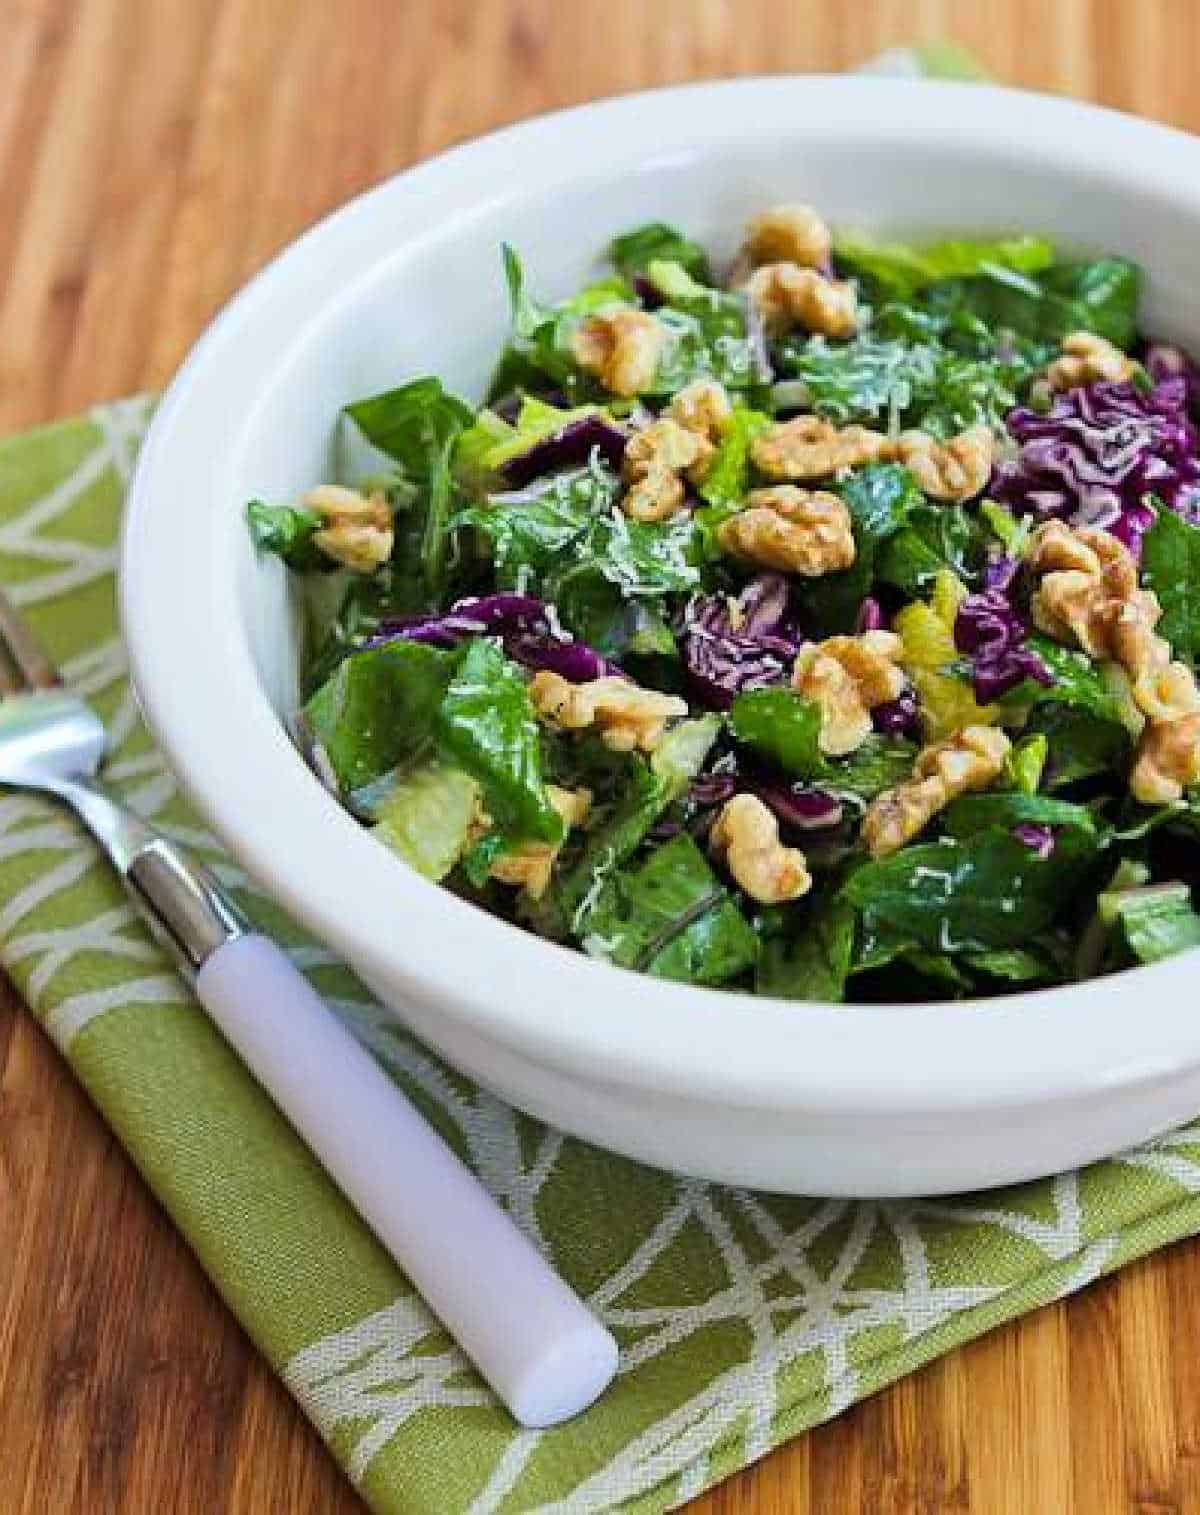 Power Greens Salad Mix shown in serving bowl on napkin